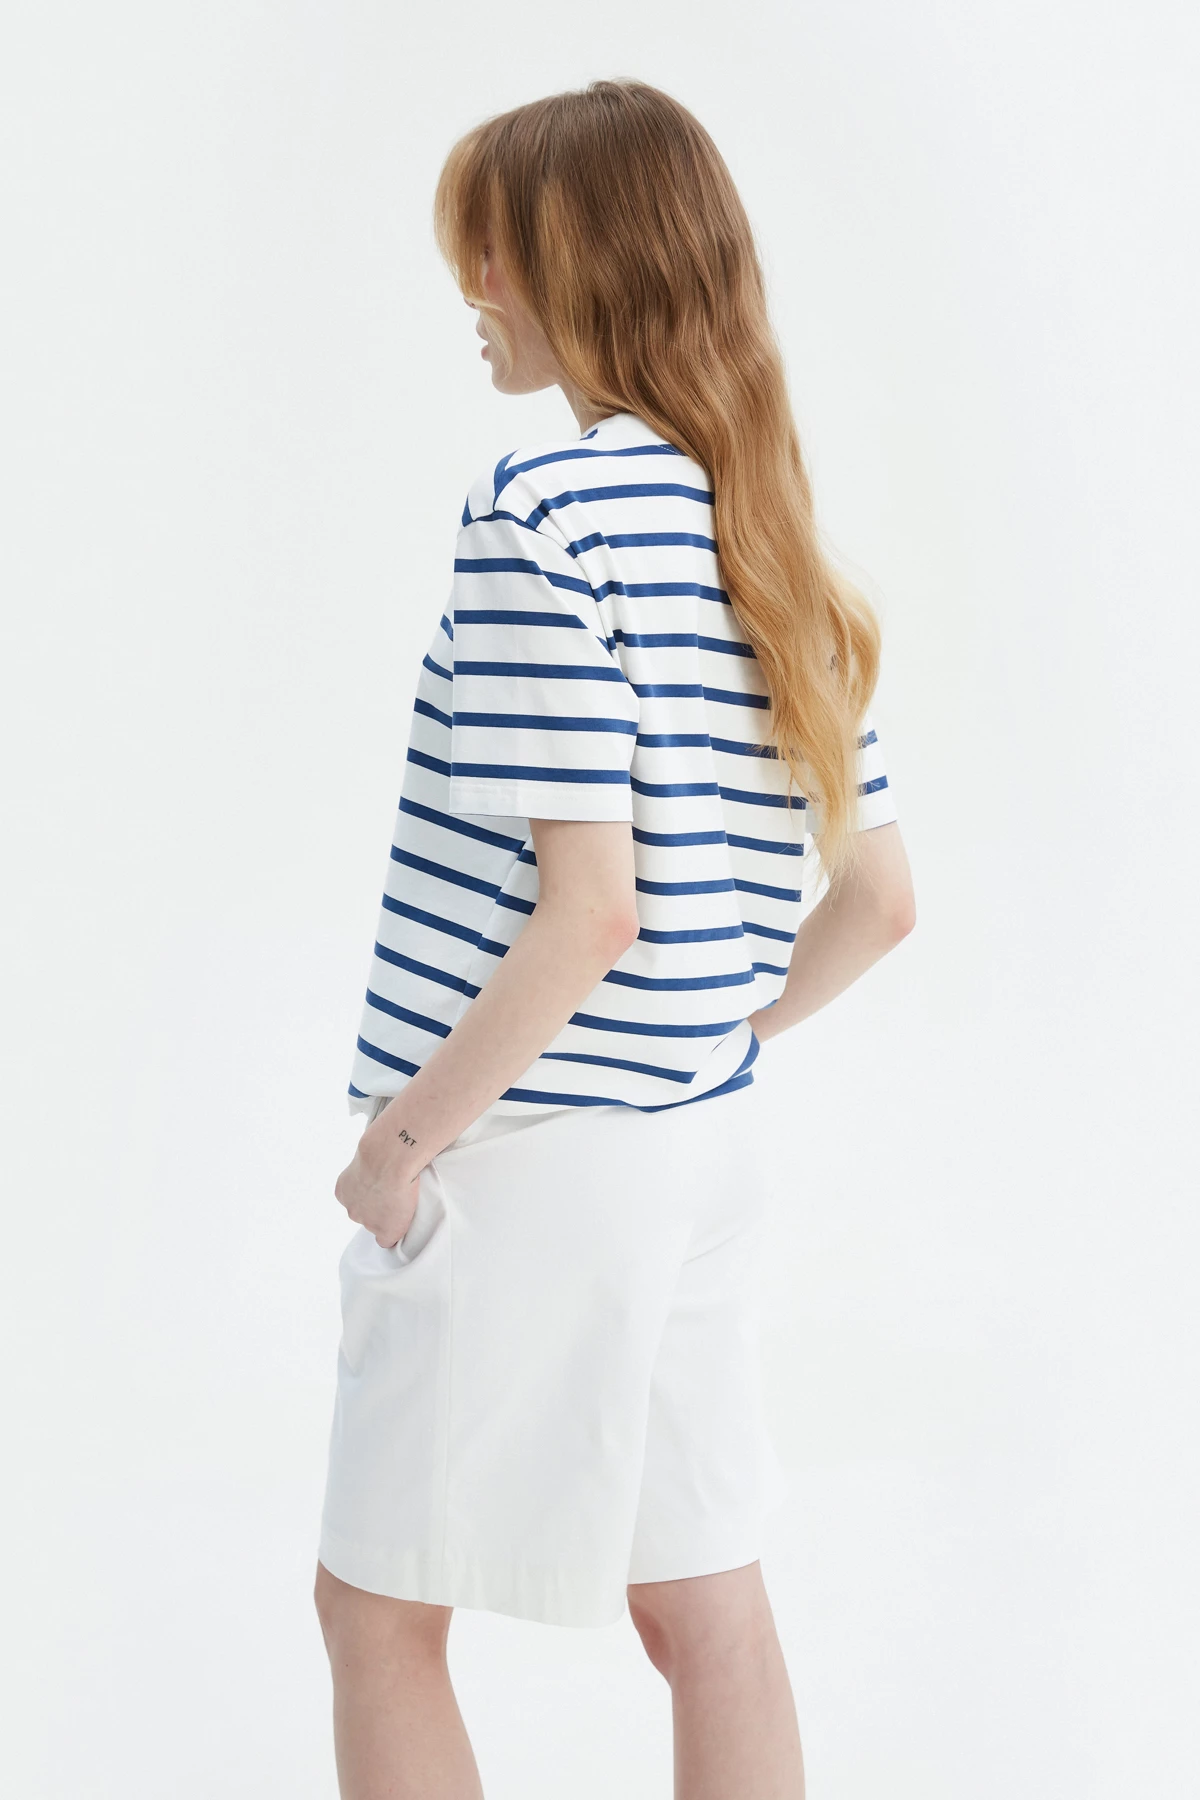 Striped white and blue cotton T-shirt, photo 3